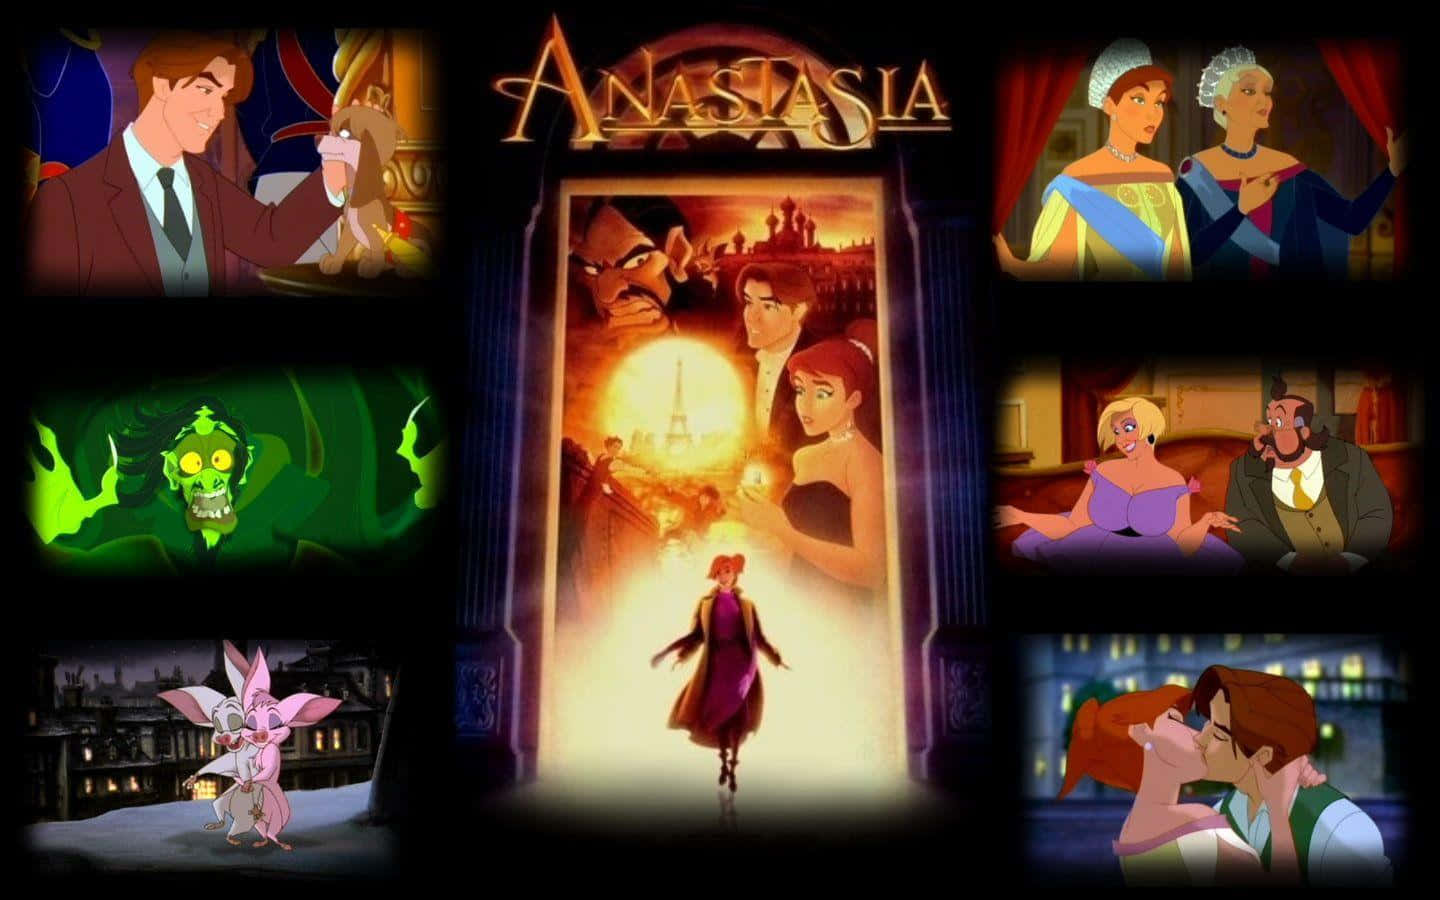 Experience the appeal of classic animation with Anastasia